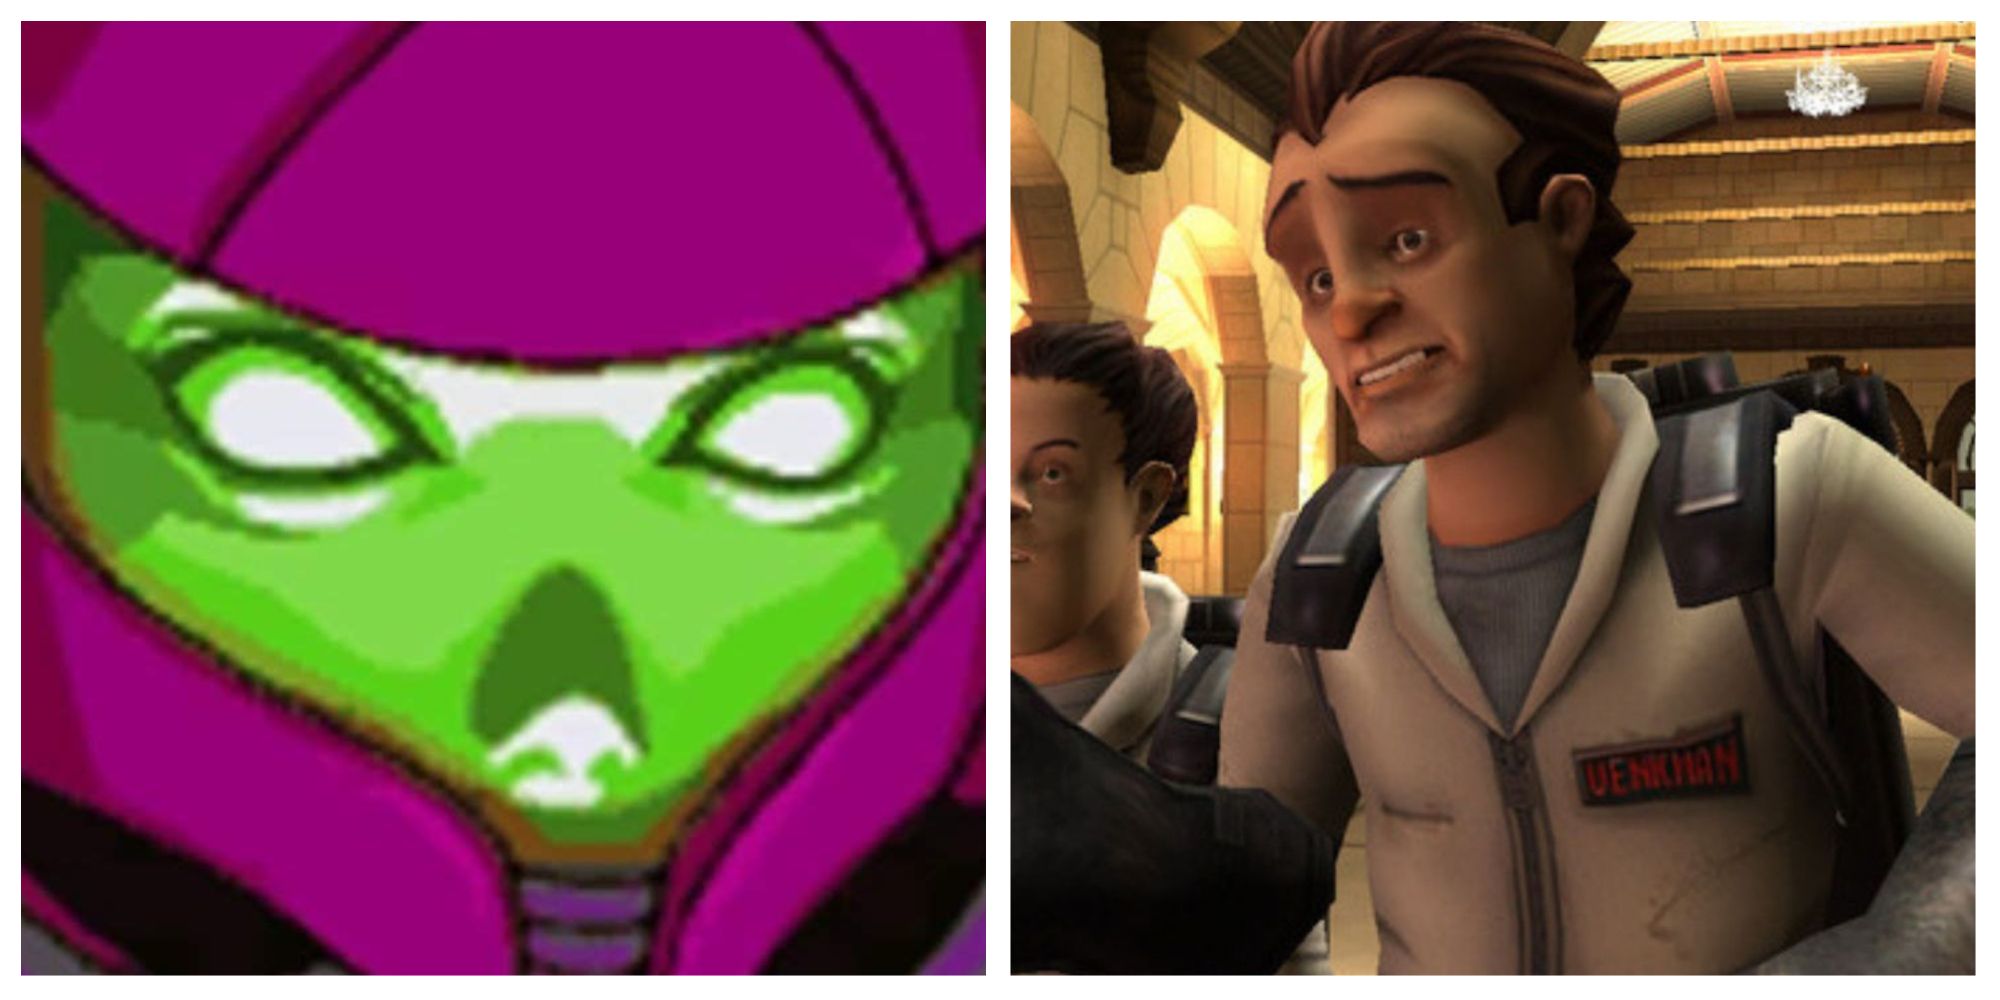 Left: The SA-X from Metroid Fusion. Right: Peter Venkman from Ghostbusters on the Wii